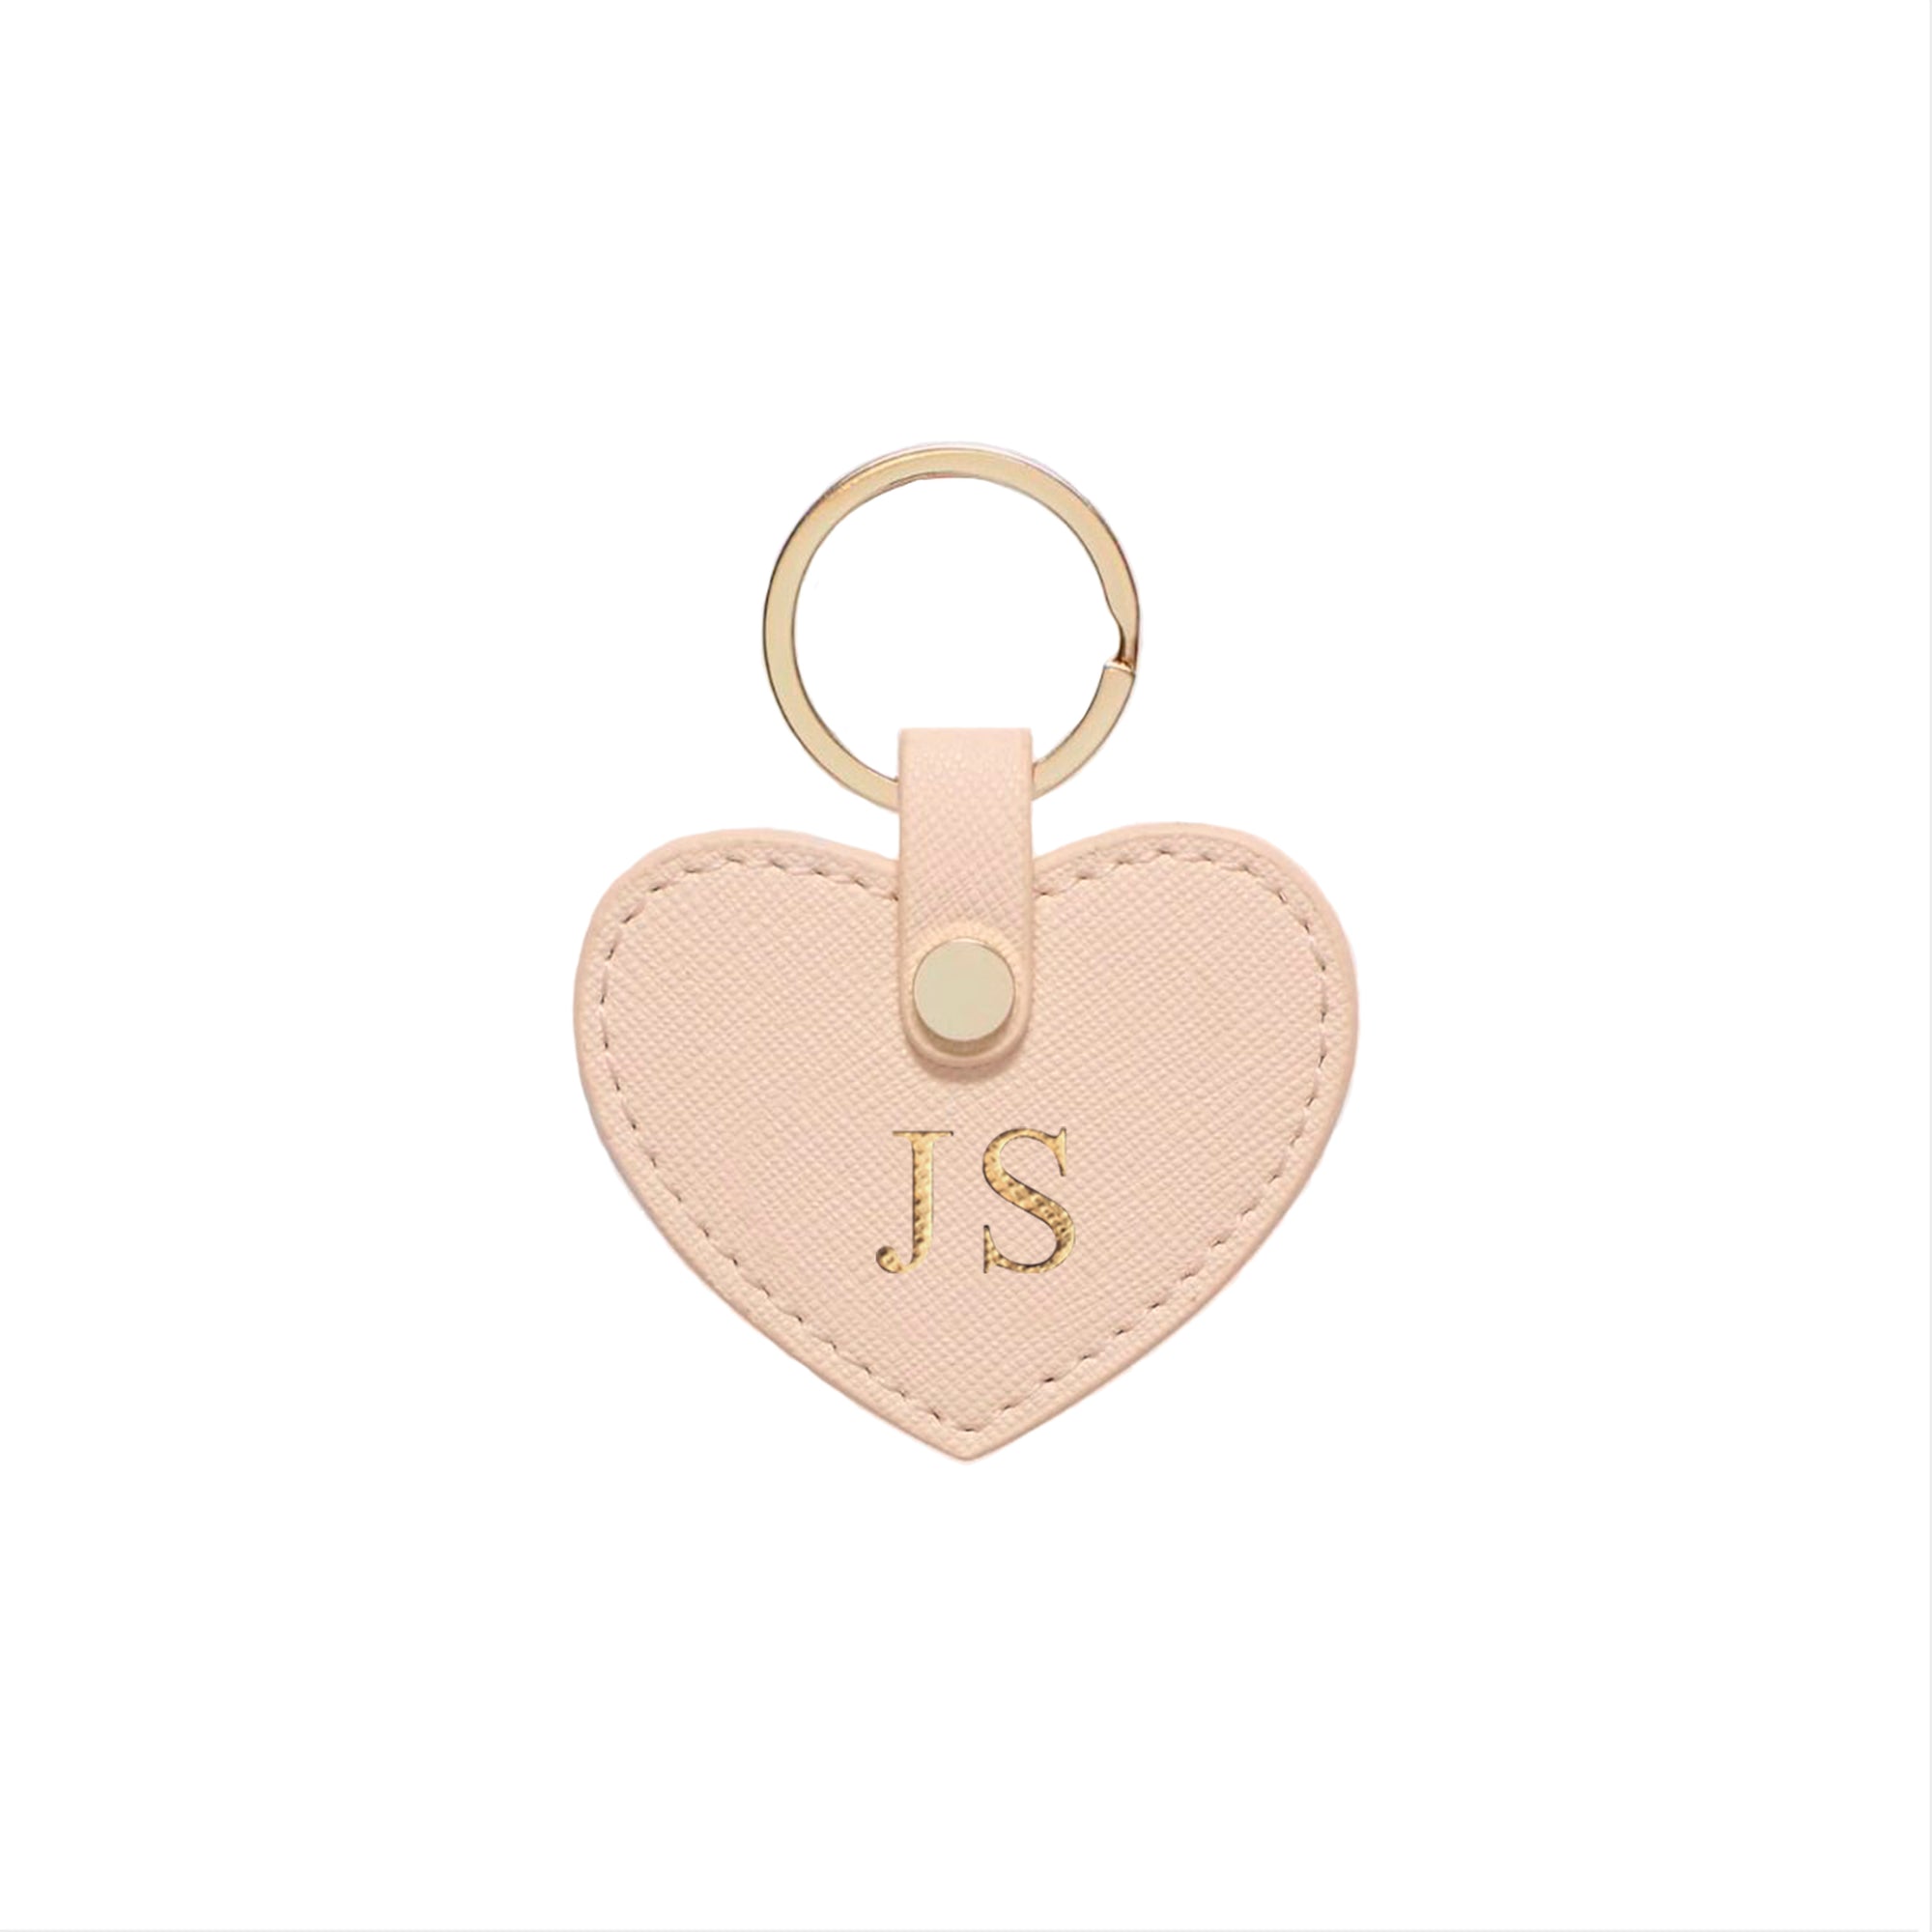 Peach Pink Saffiano Leather Key Ring - HB LONDON